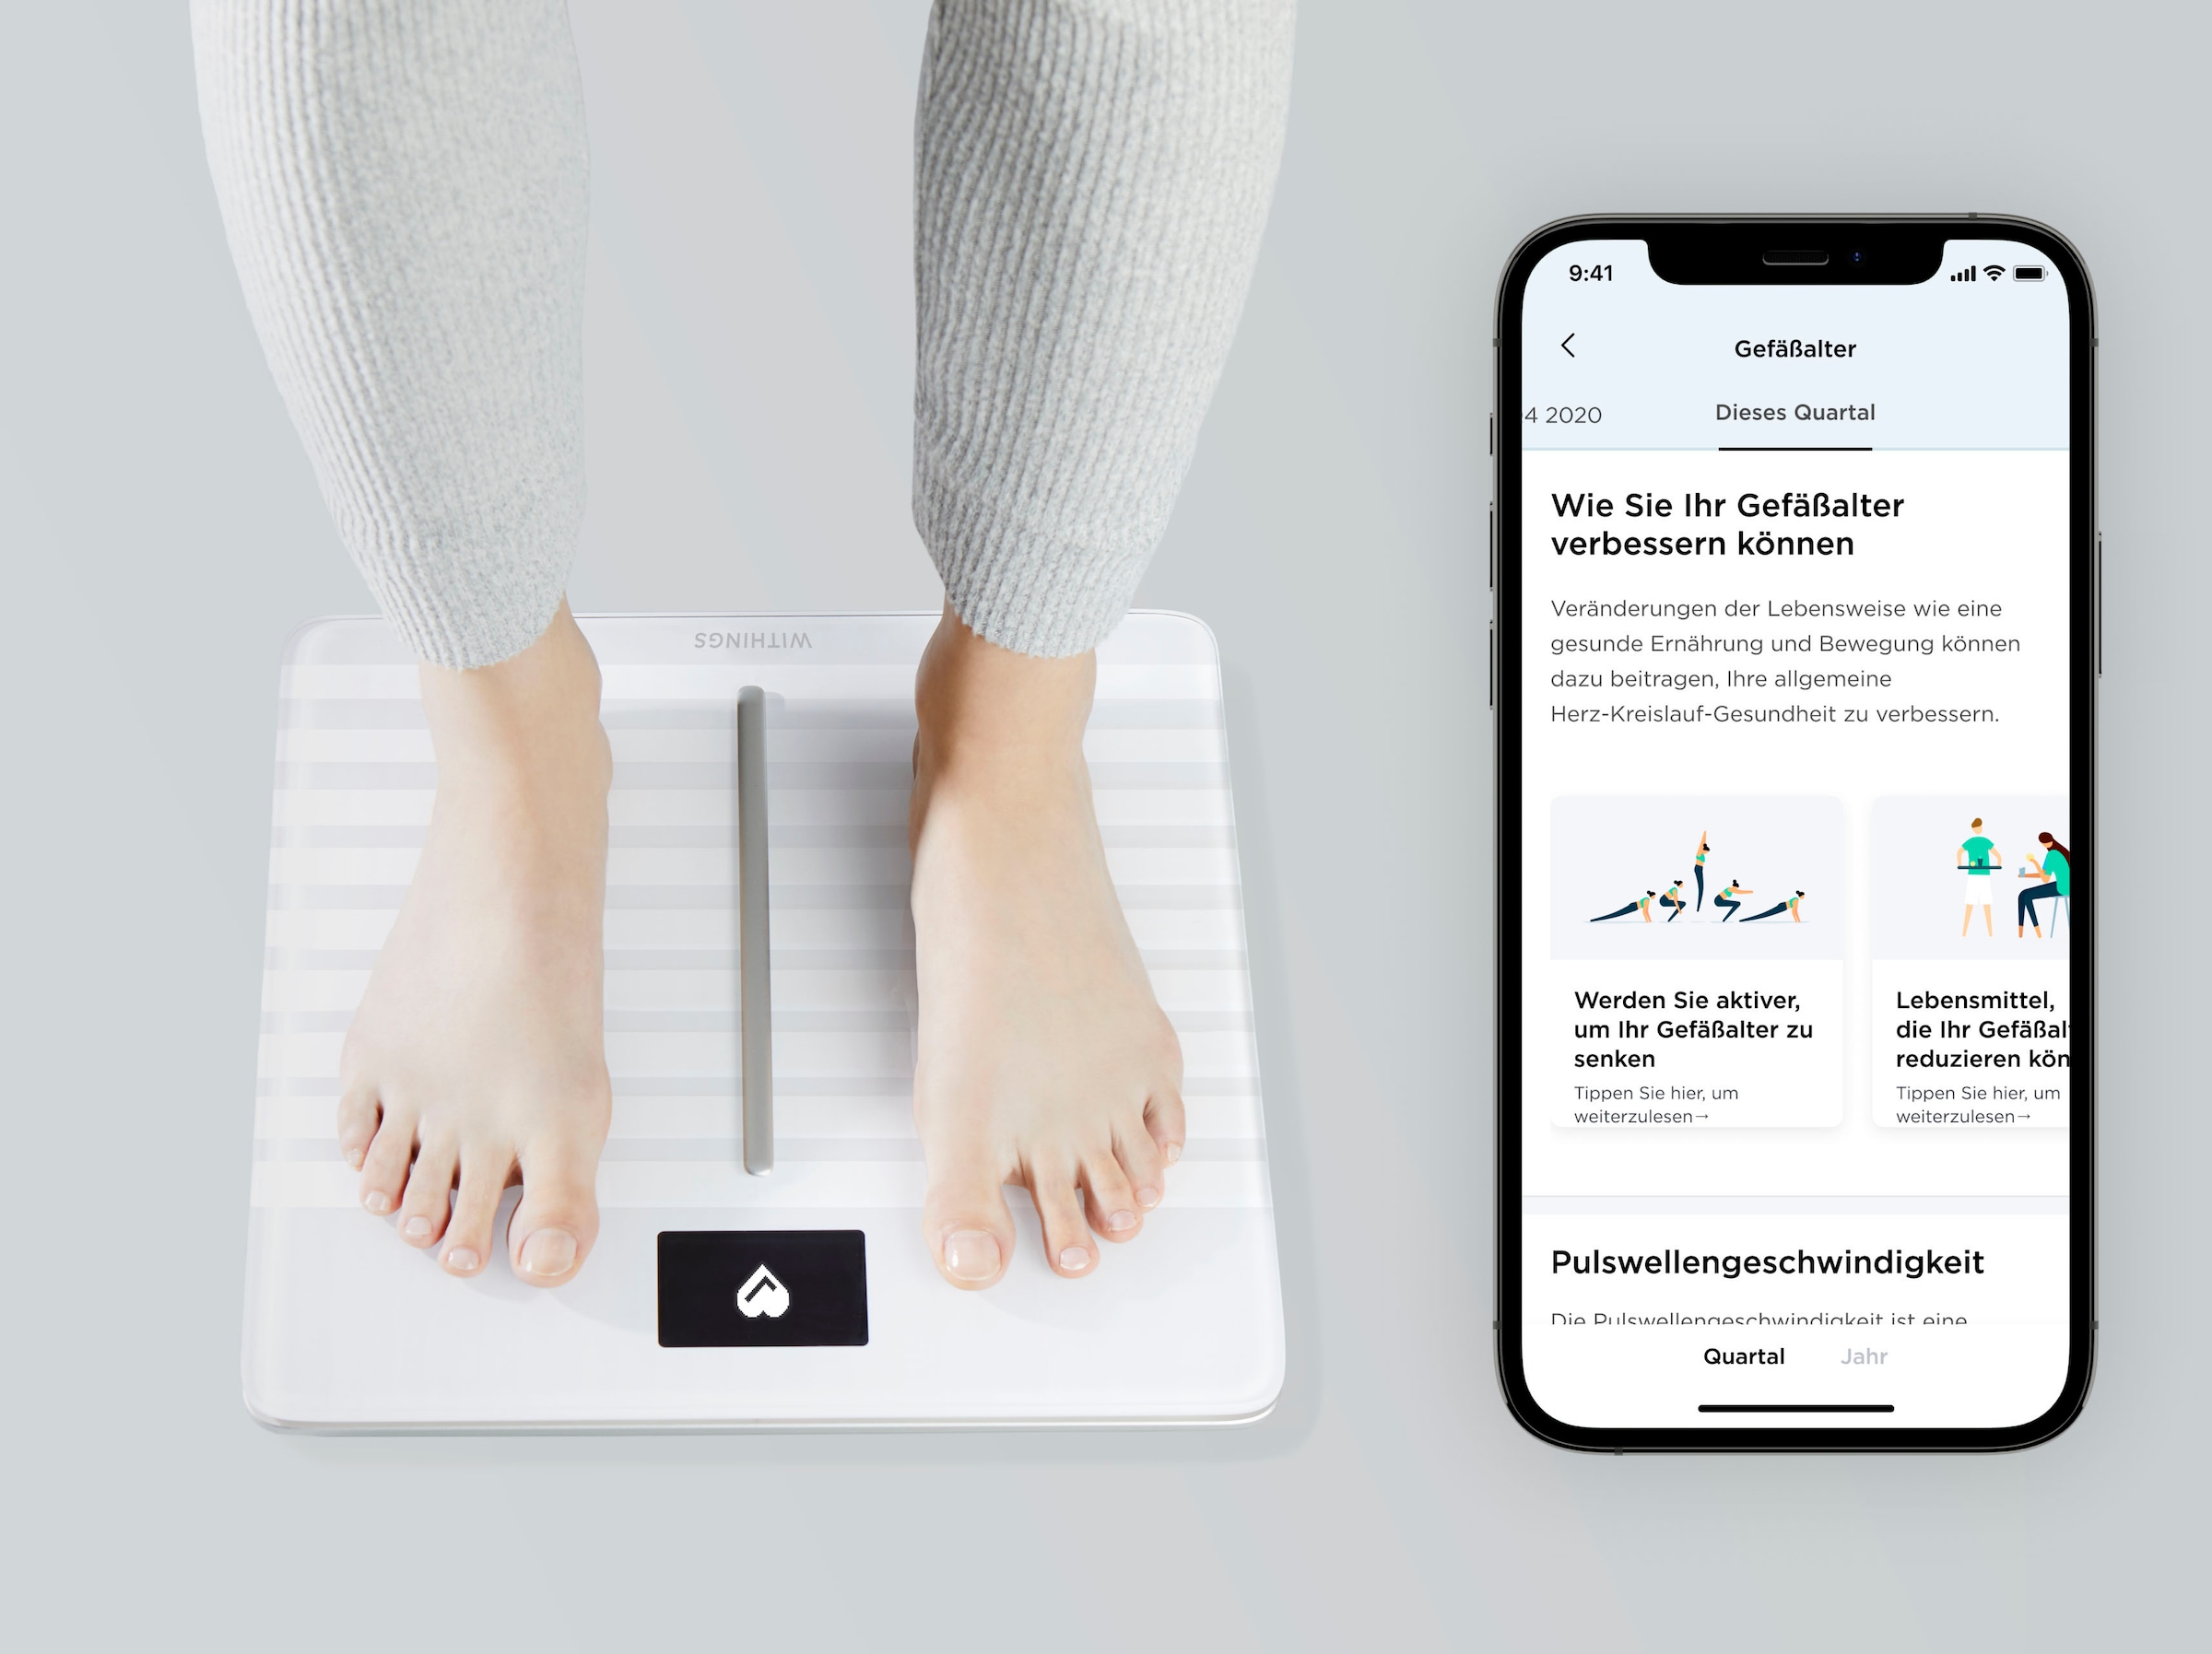 Withings Körper-Analyse-Waage »Body Cardio«